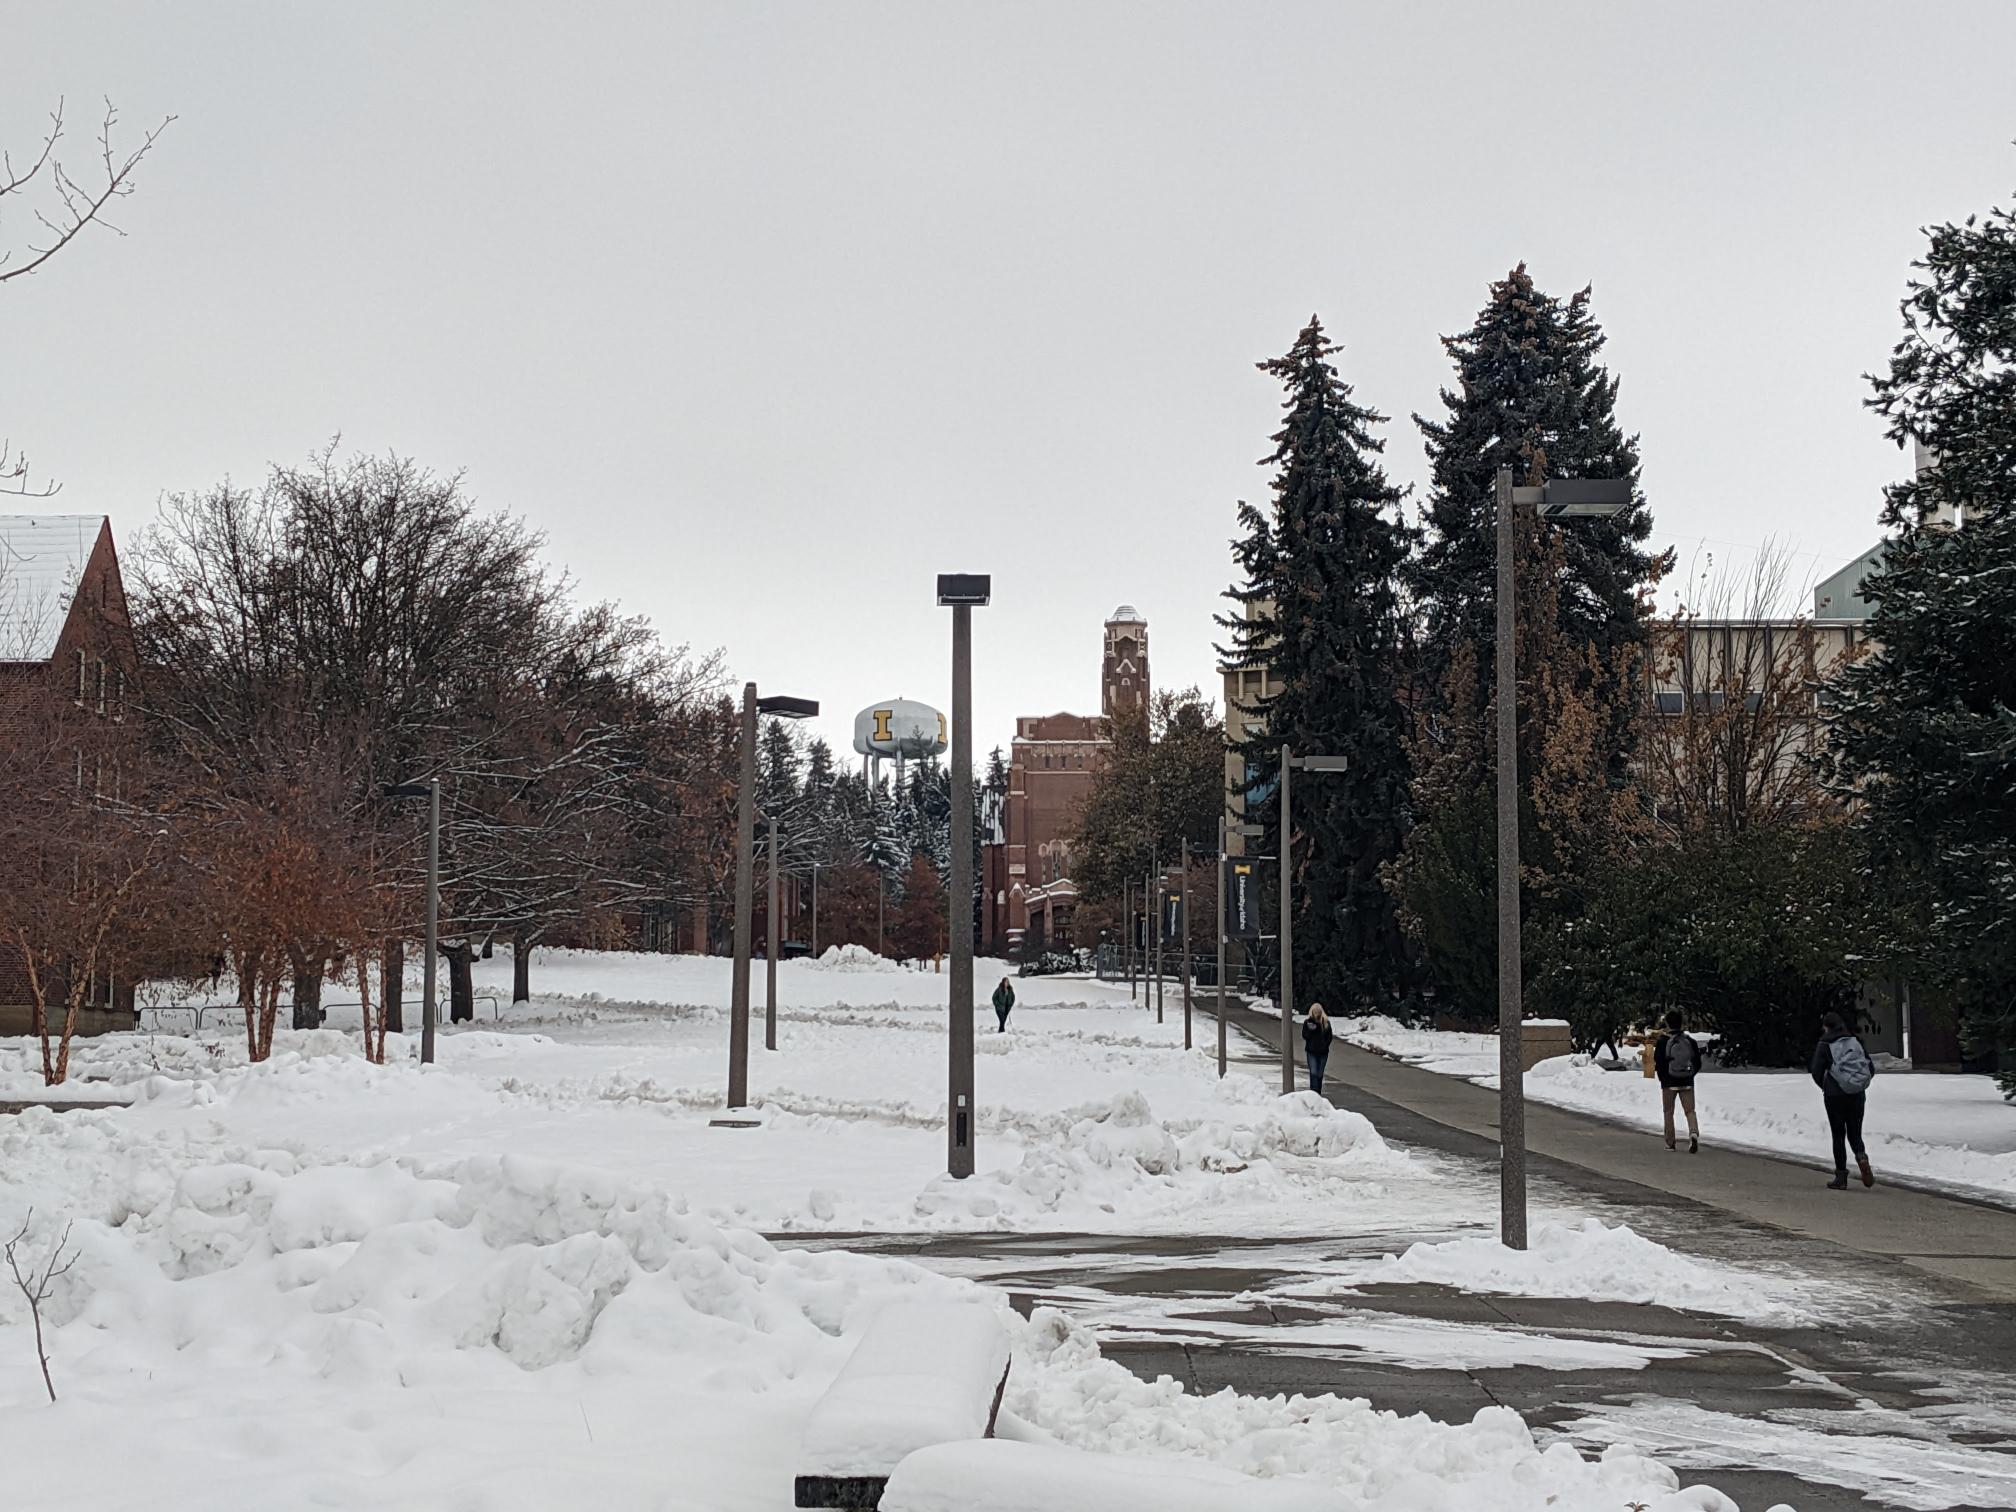 University of Idaho students walk up a sidewalk from the distance between fields of snow. Buildings and dark green trees line the horizon.